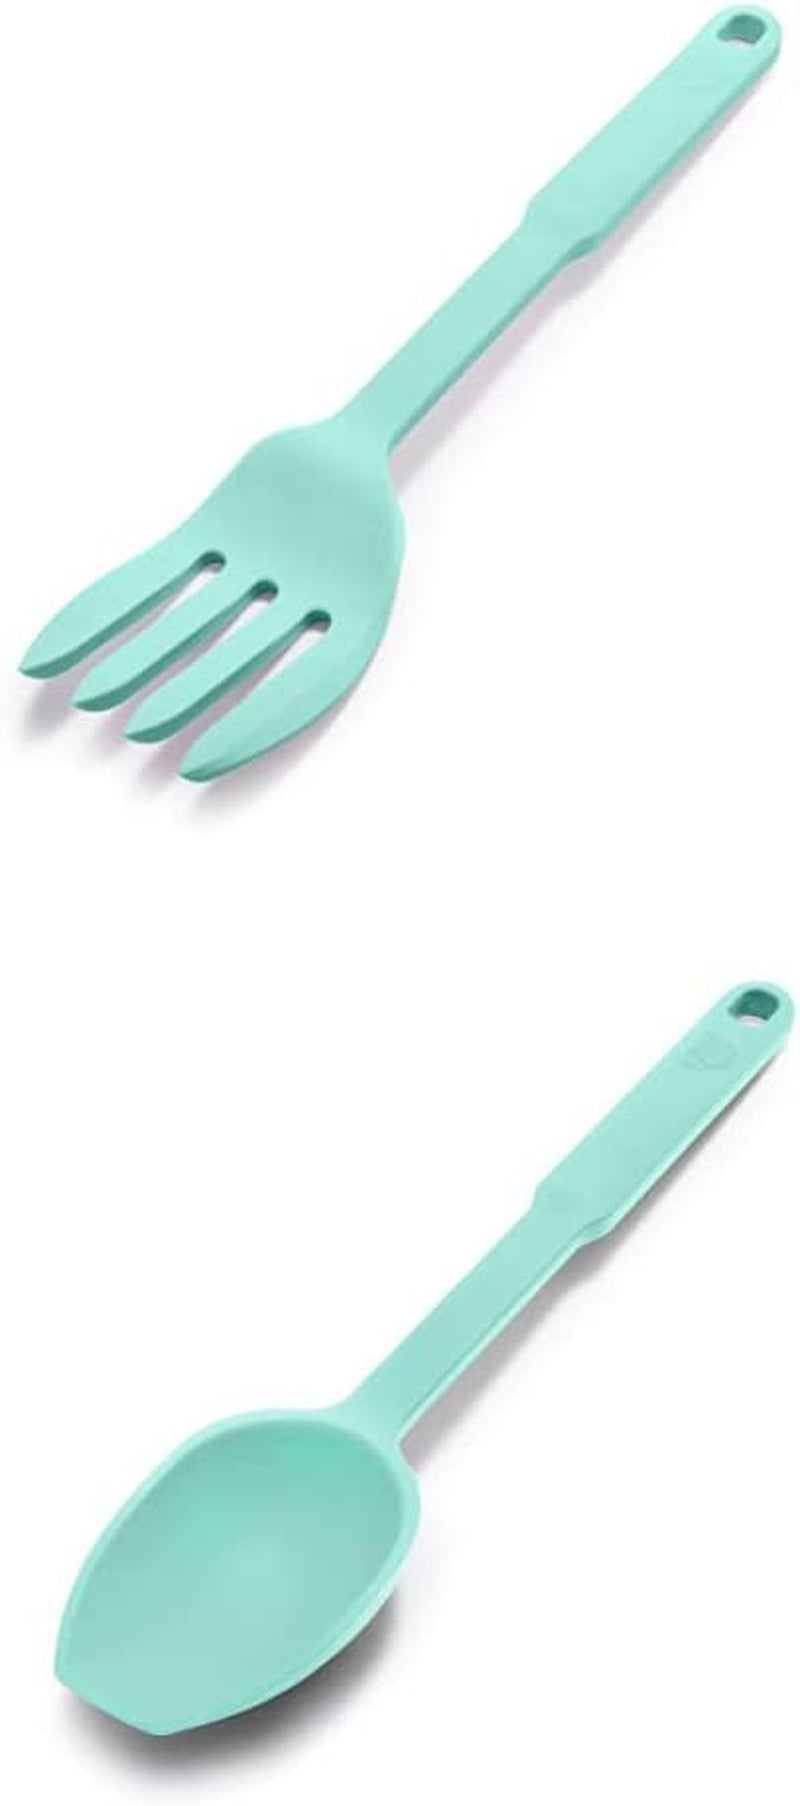 Greenlife Cooking Tools and Utensils, Silicone Spoon for Scooping Scraping and Mixing, Heat and Stain Resistant, Dishwasher Safe, Red Home & Garden > Kitchen & Dining > Kitchen Tools & Utensils GreenLife Turquoise Fork and Spoon Set 